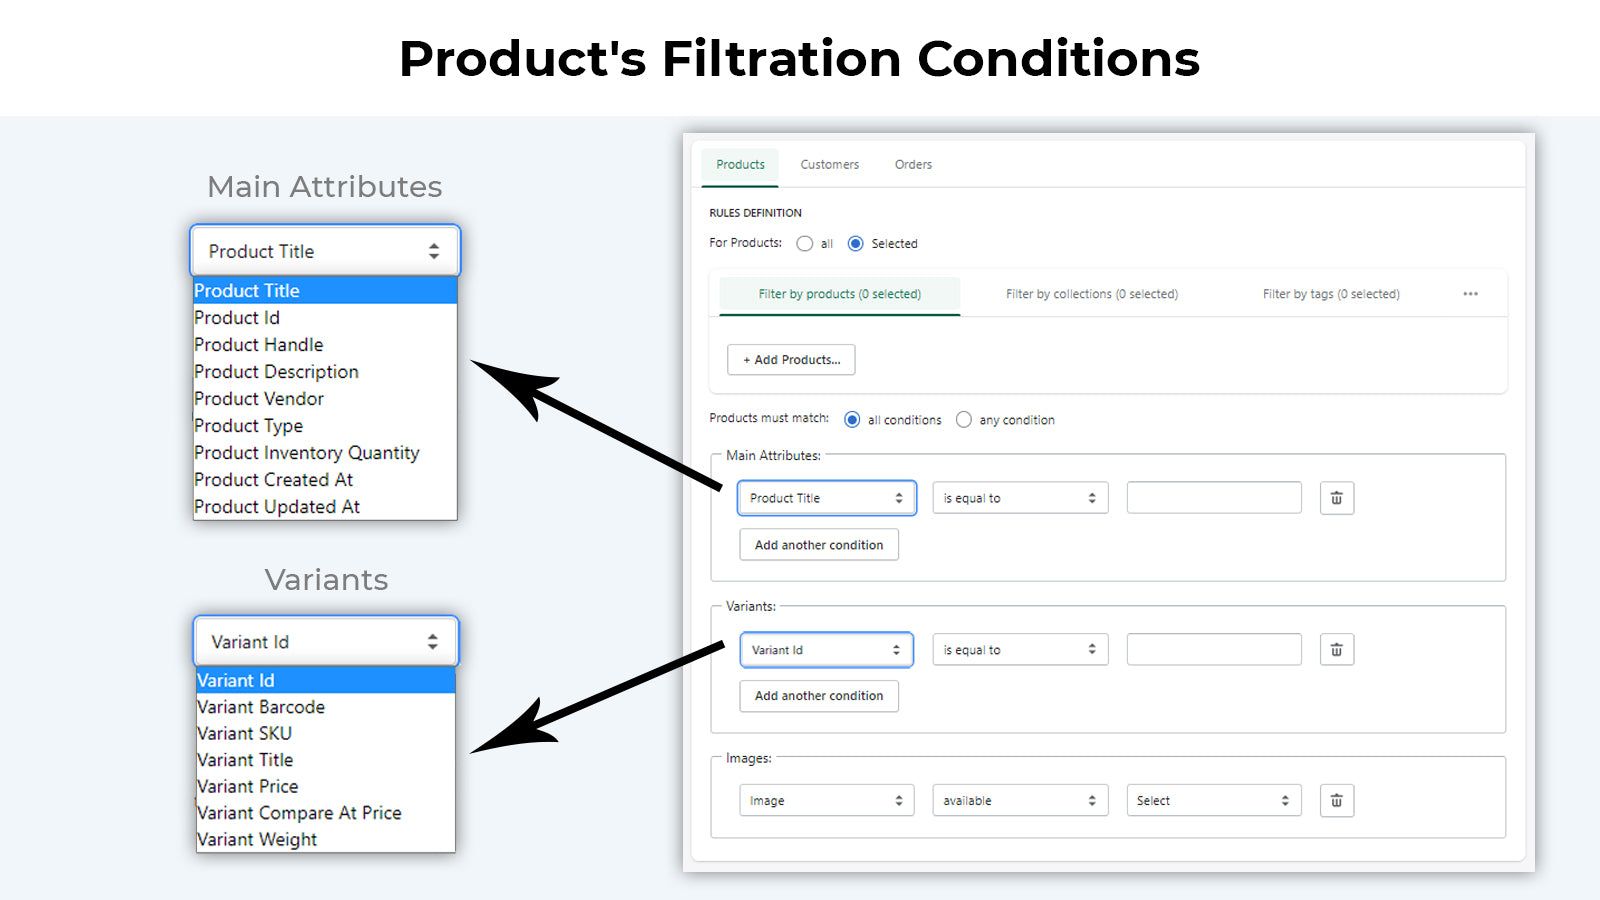 Product's Filtration Conditions